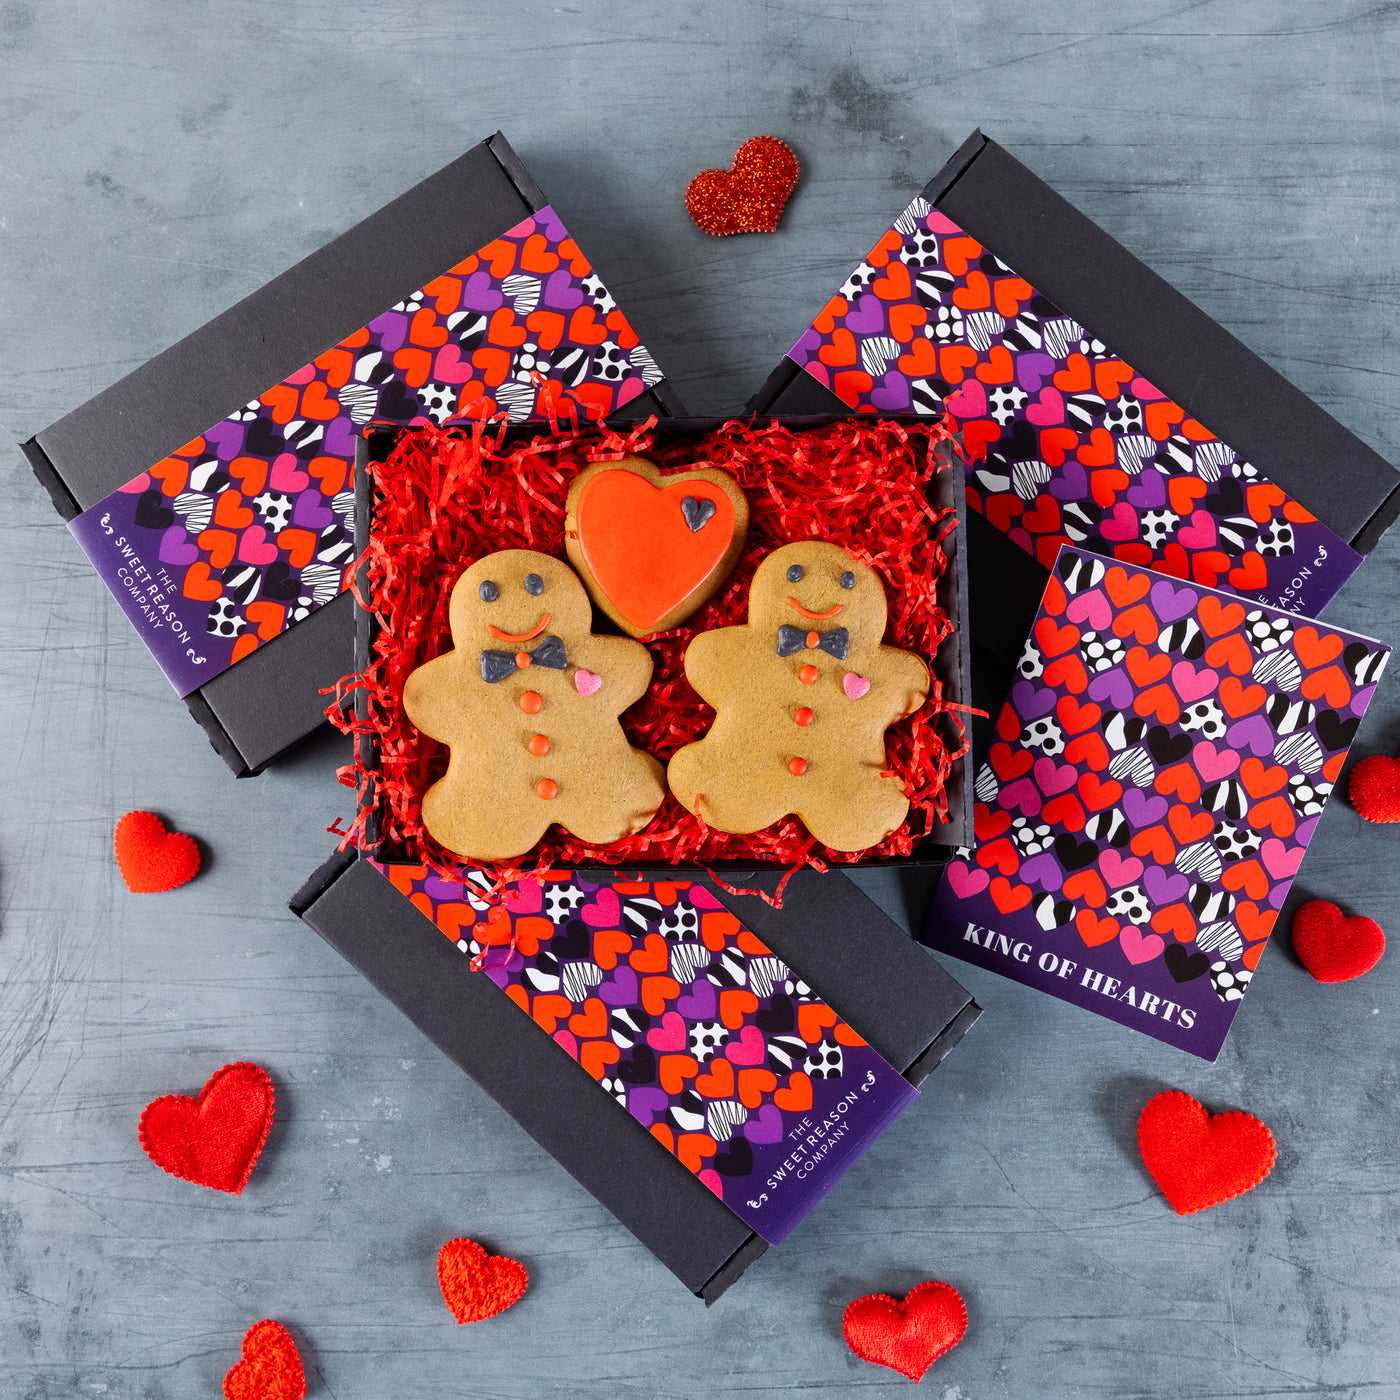 'King of Hearts' Biscuit Letterbox